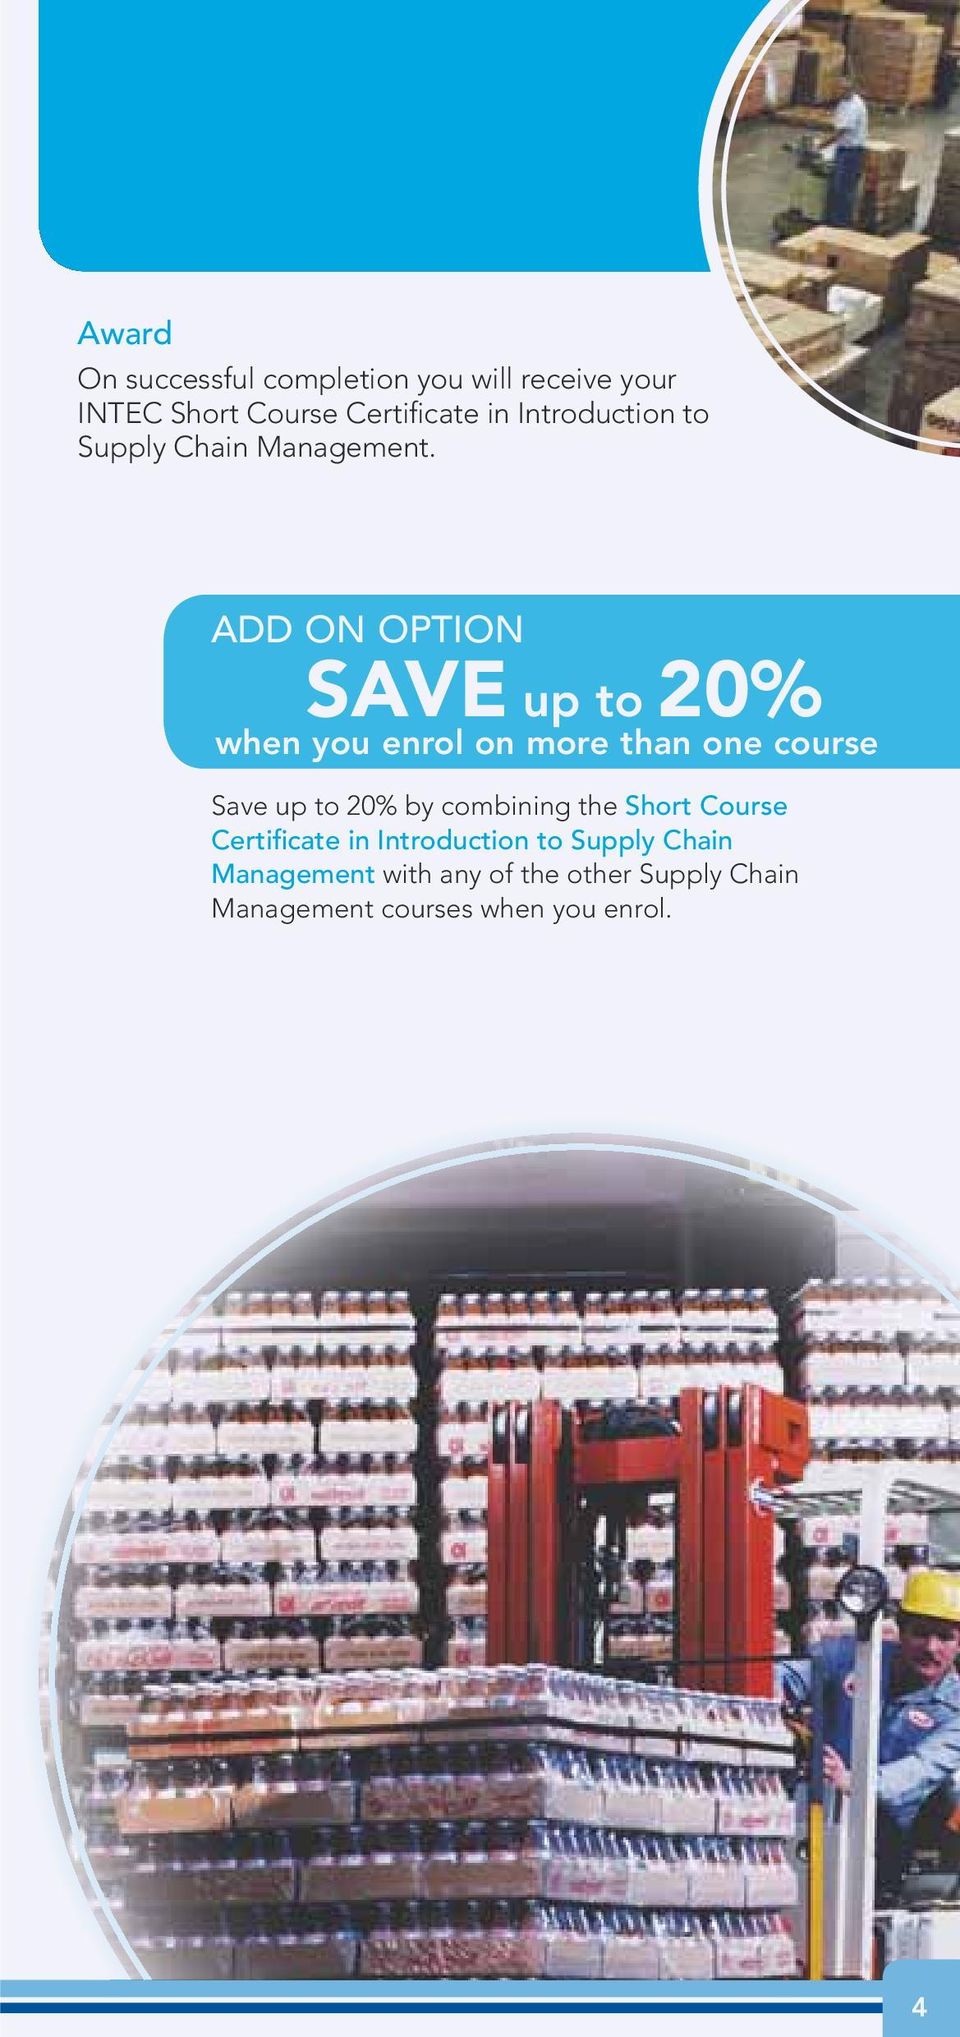 ADD ON OPTION SAVE up to 20% when you enrol on more than one course Save up to 20% by